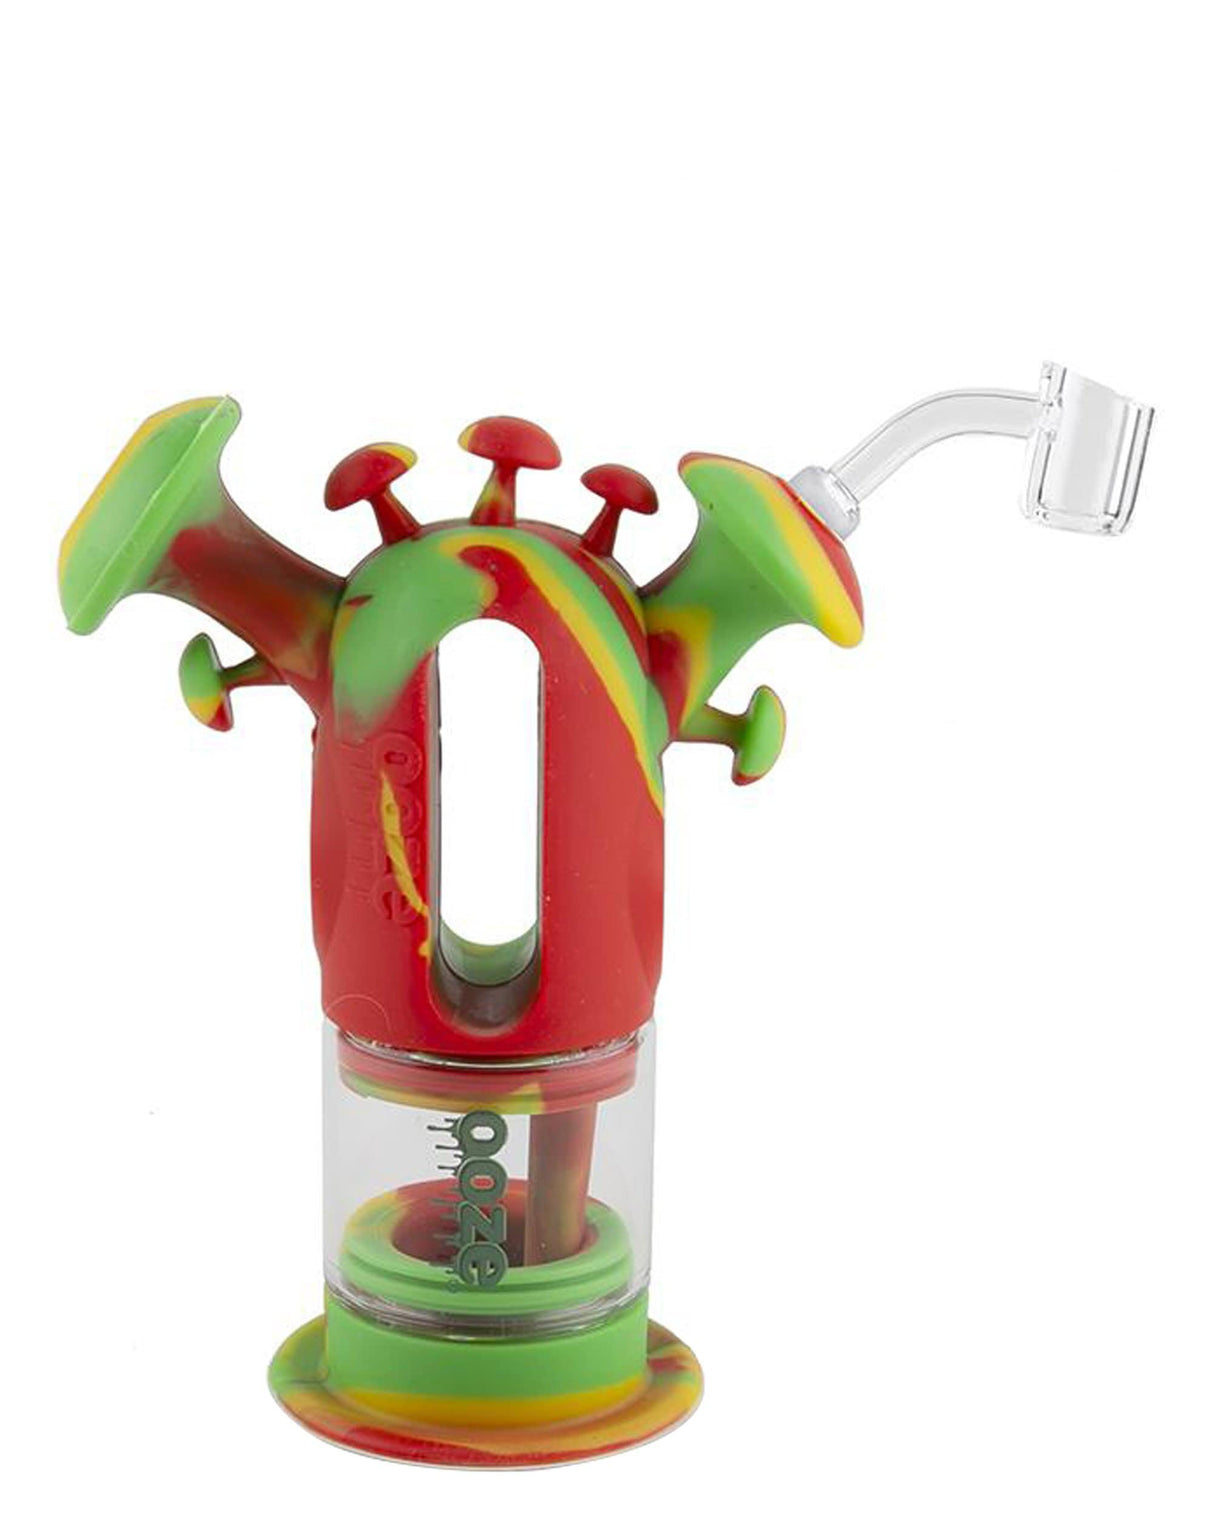 Ooze - Trip Silicone Bubbler in Rasta colors with Quartz Banger, 45 Degree Joint - Front View